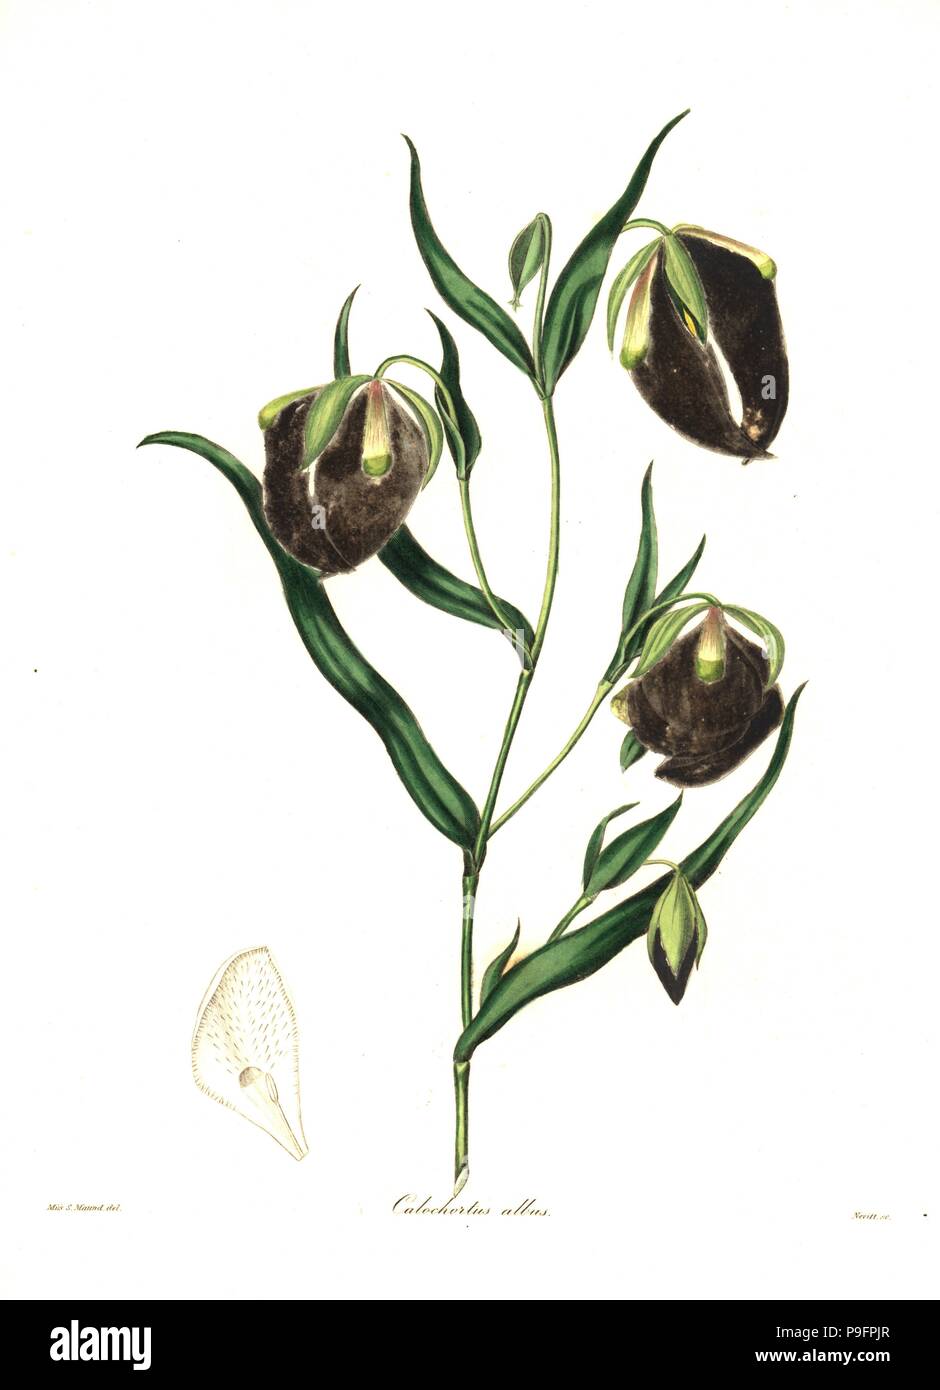 White calochortus, Calochortus albus. Oxidized handcoloured copperplate engraving by S. Nevitt after a botanical illustration by Miss Sara Maund from Benjamin Maund and the Rev. John Stevens Henslow's The Botanist, London, 1836. Stock Photo